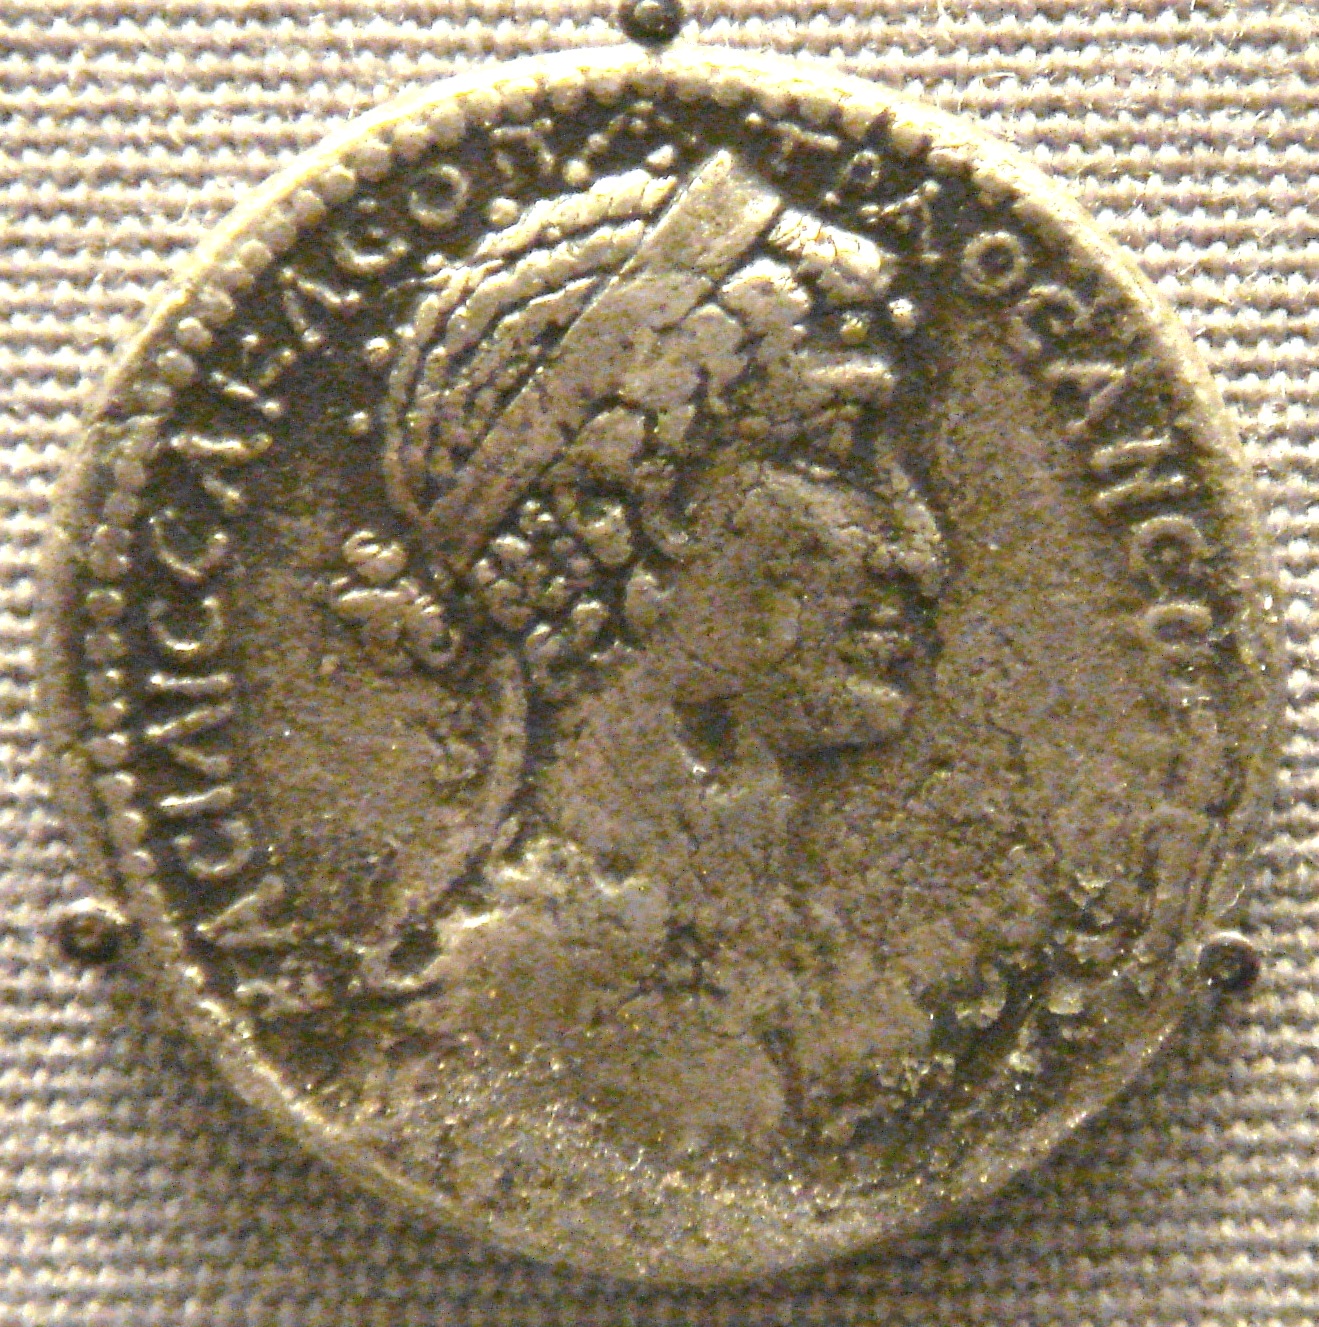 A silver coin showing Cleopatra’s face. Image: British Museum / Wikimedia Commons